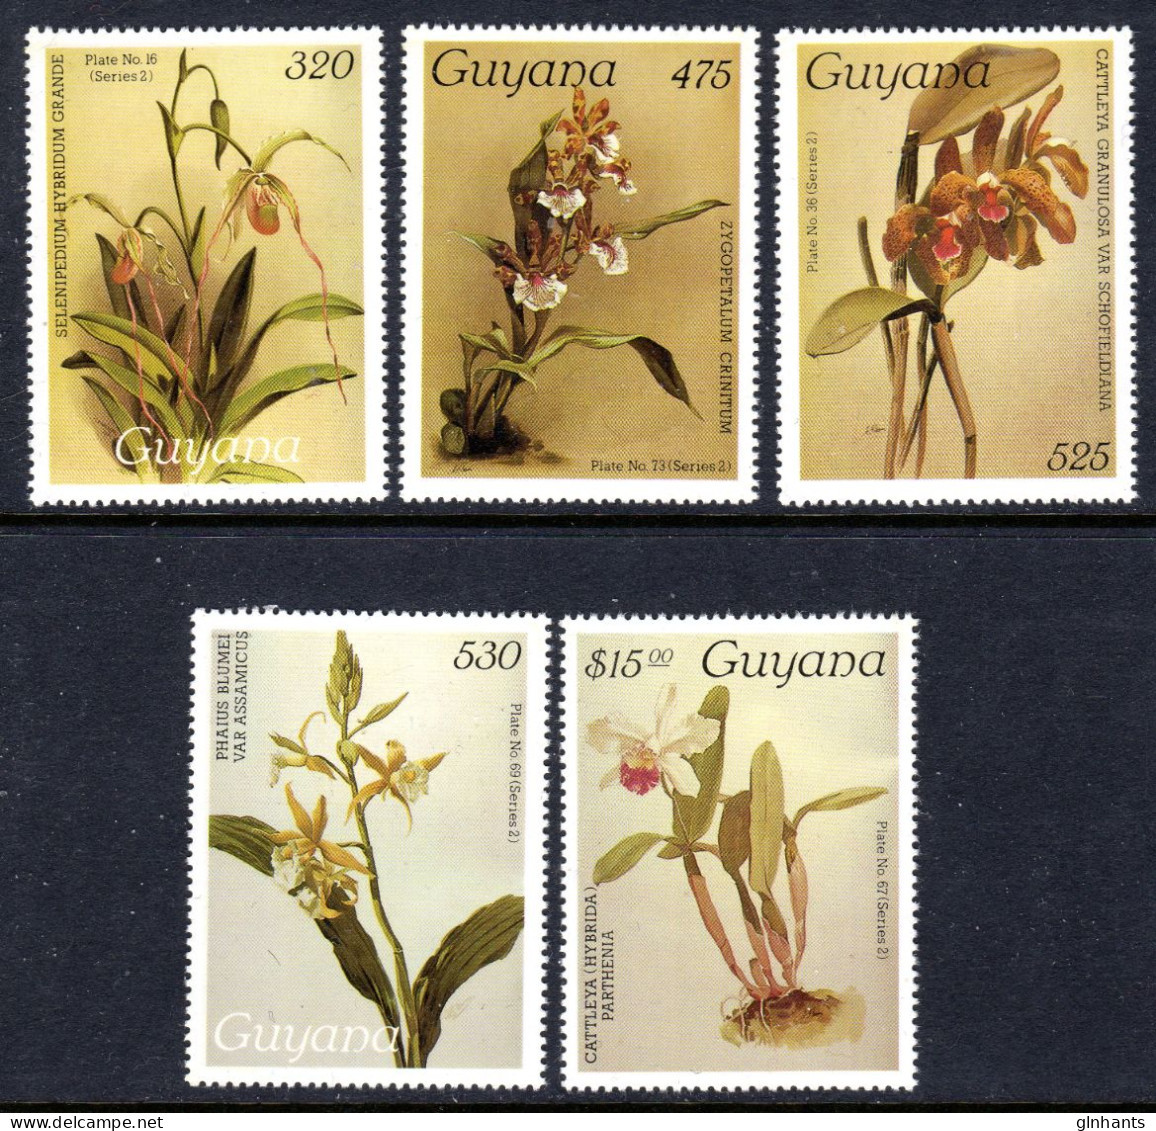 GUYANA - 1988 REICHENBACHIA ORCHIDS 29th ISSUE COMPLETE SET (5V) FIME MNH ** SG2314-2318 - Guyana (1966-...)